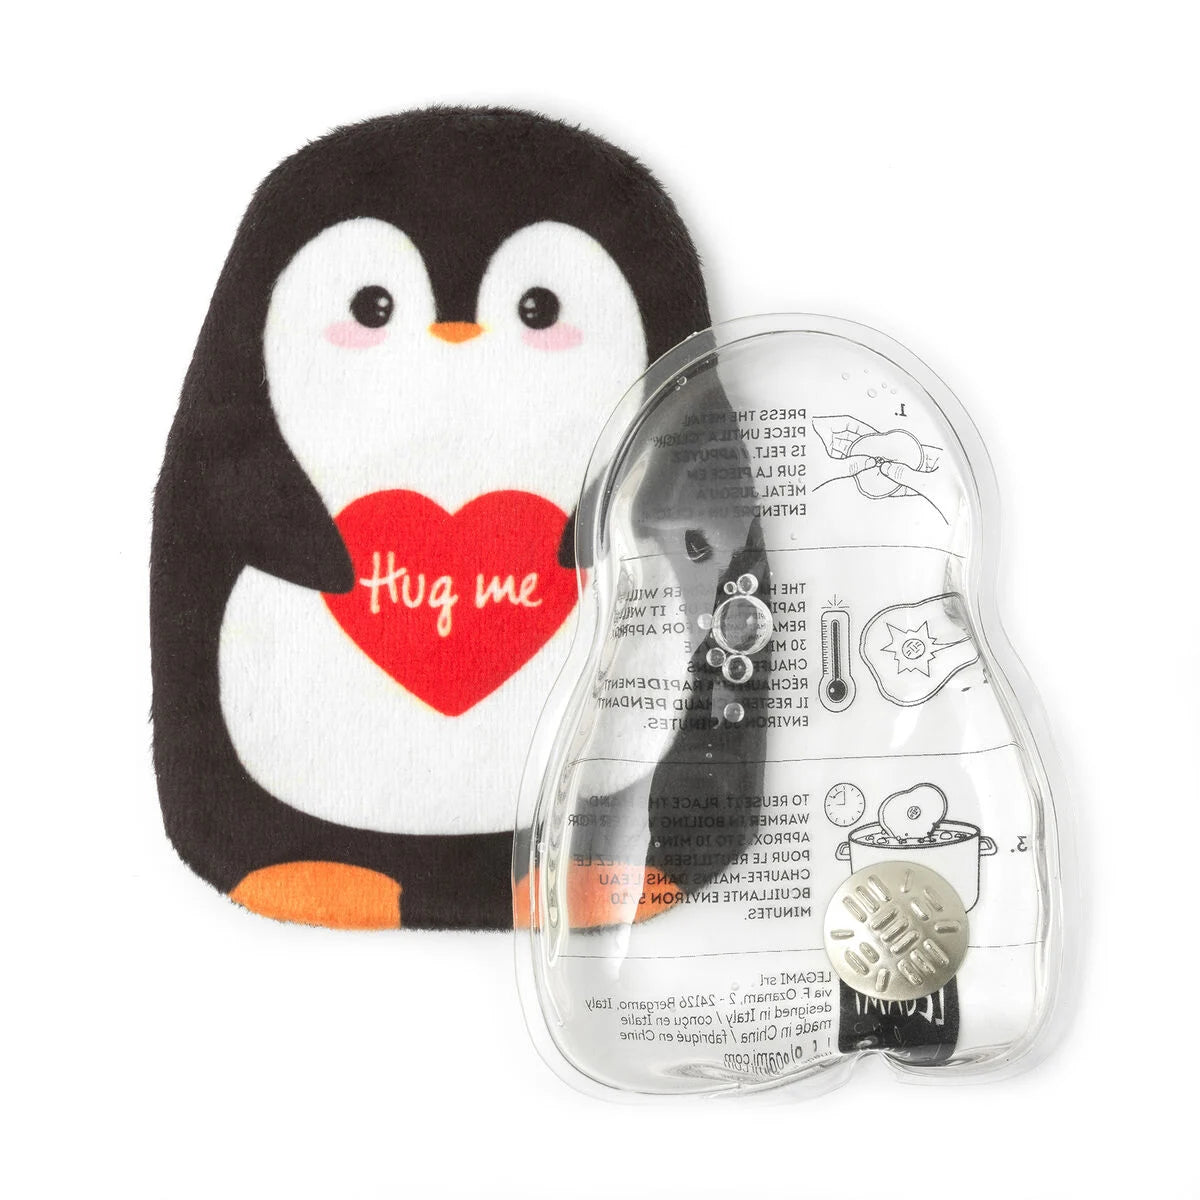 Fab Gifts | Legami Hand Warmer Penguin by Weirs of Baggot Street